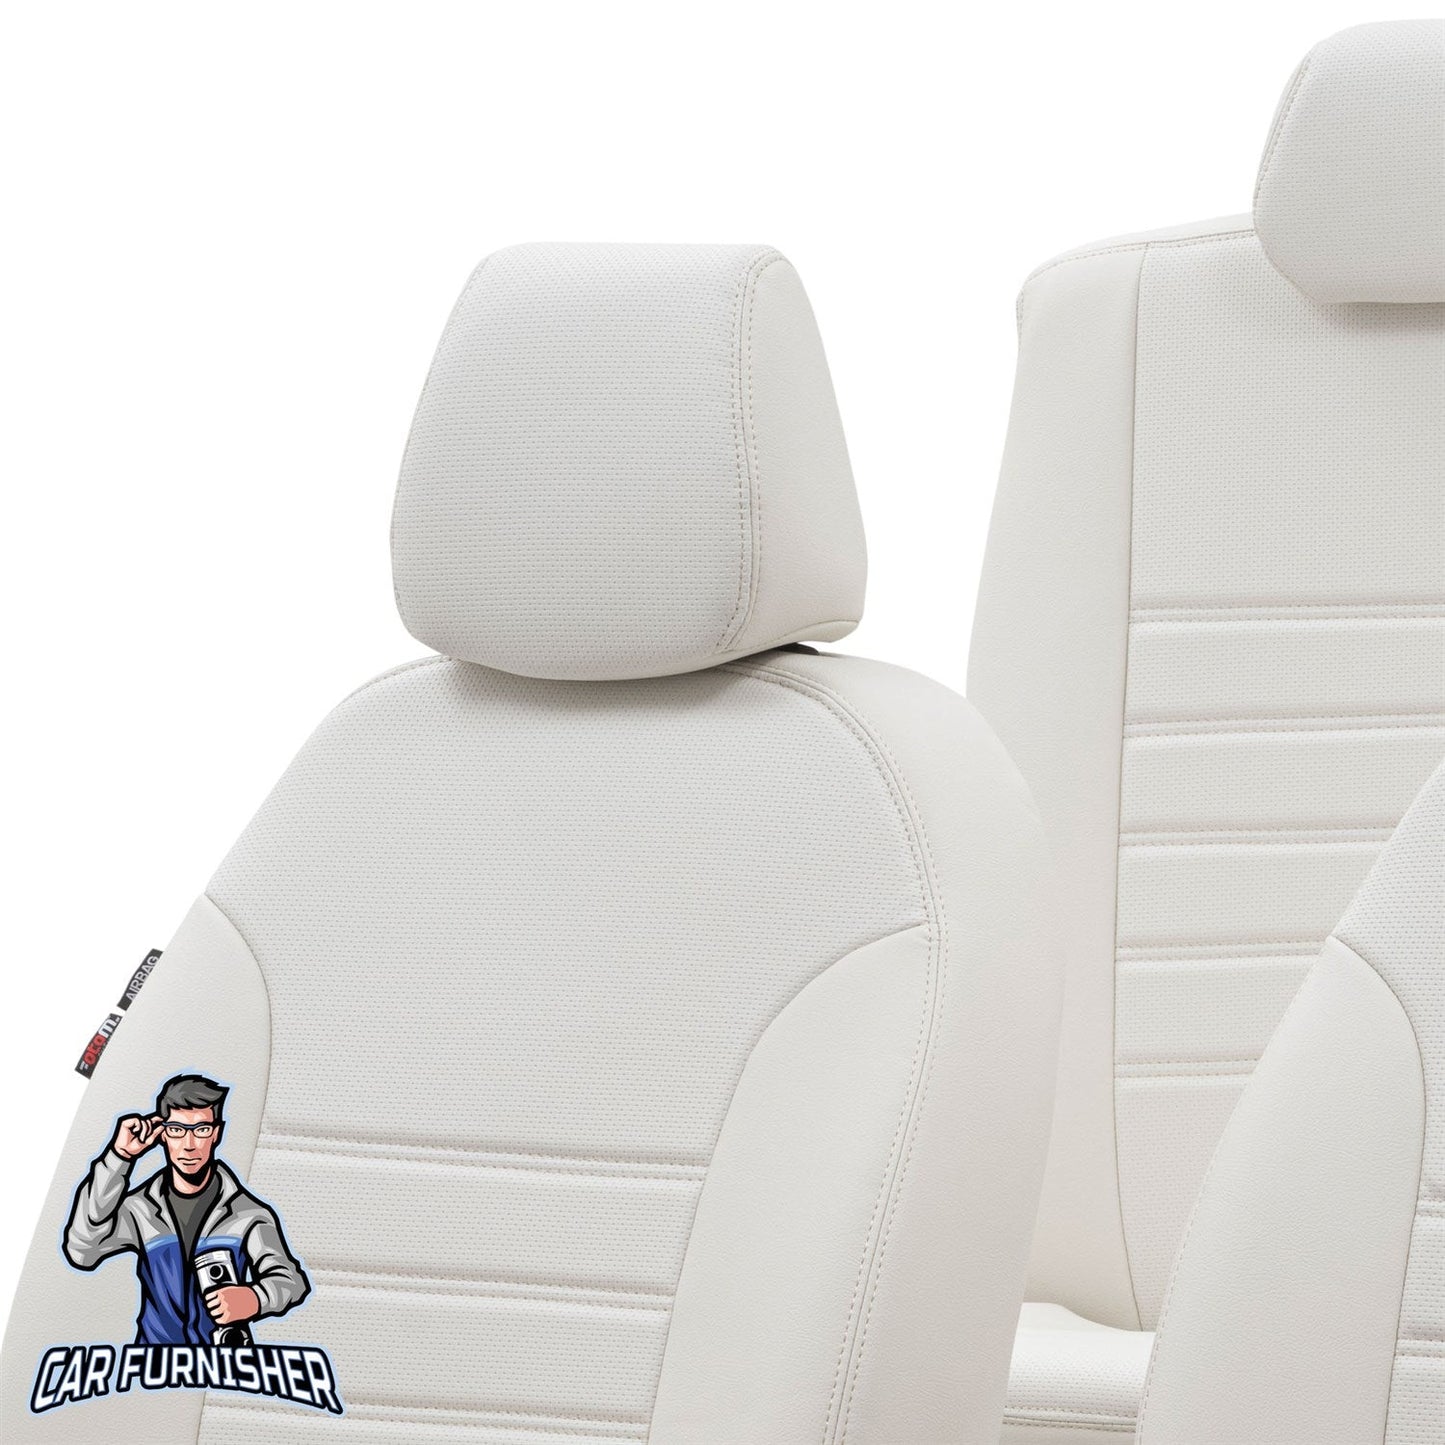 Seat Leon Seat Covers New York Leather Design Ivory Leather